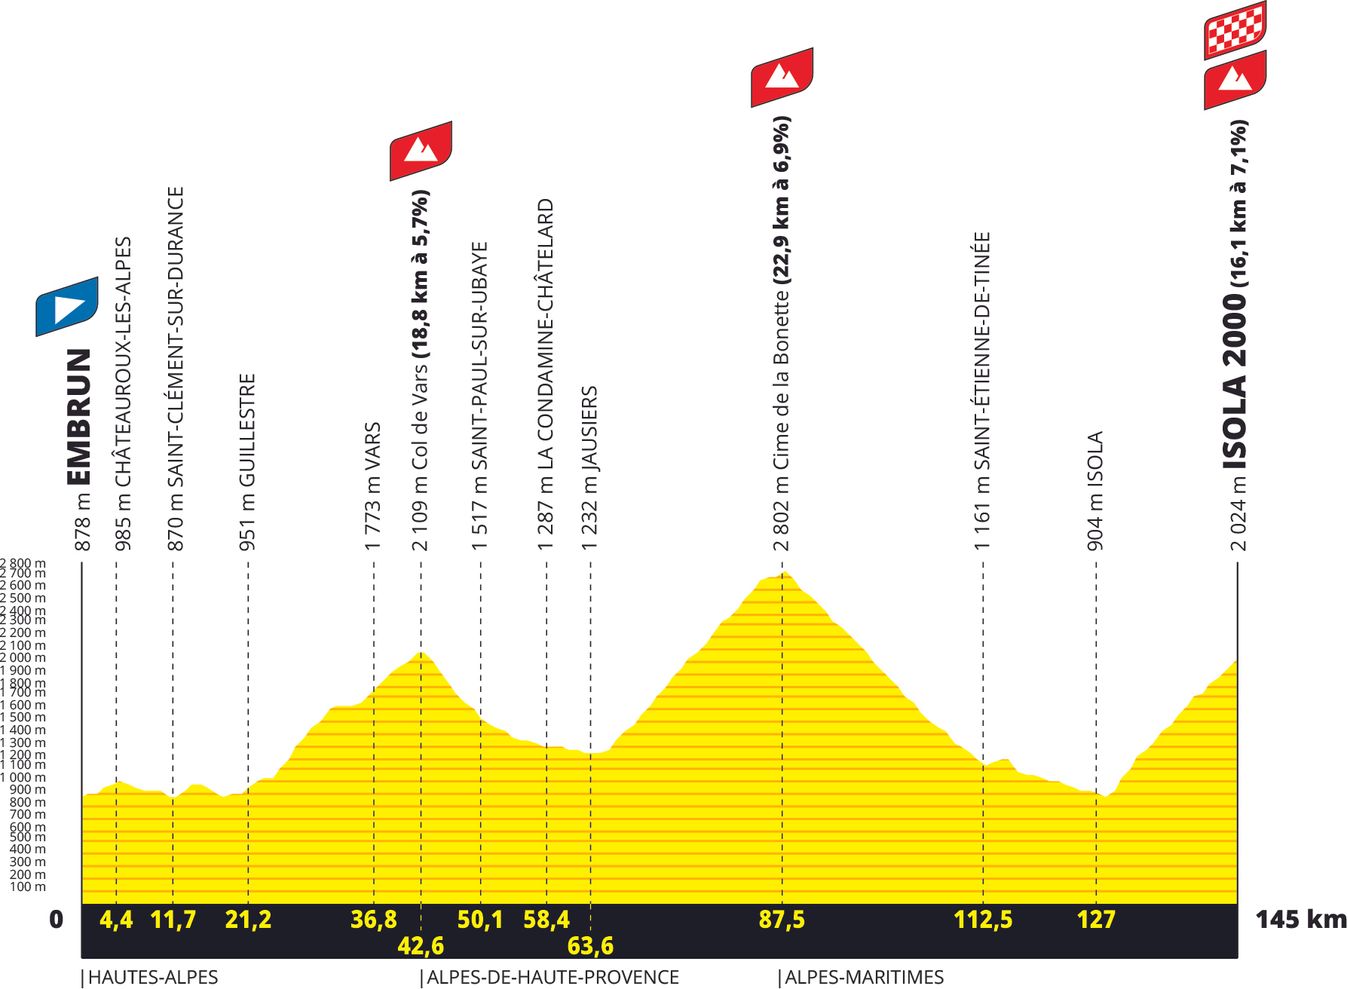 The profile for stage 19 of the 2024 Tour de France